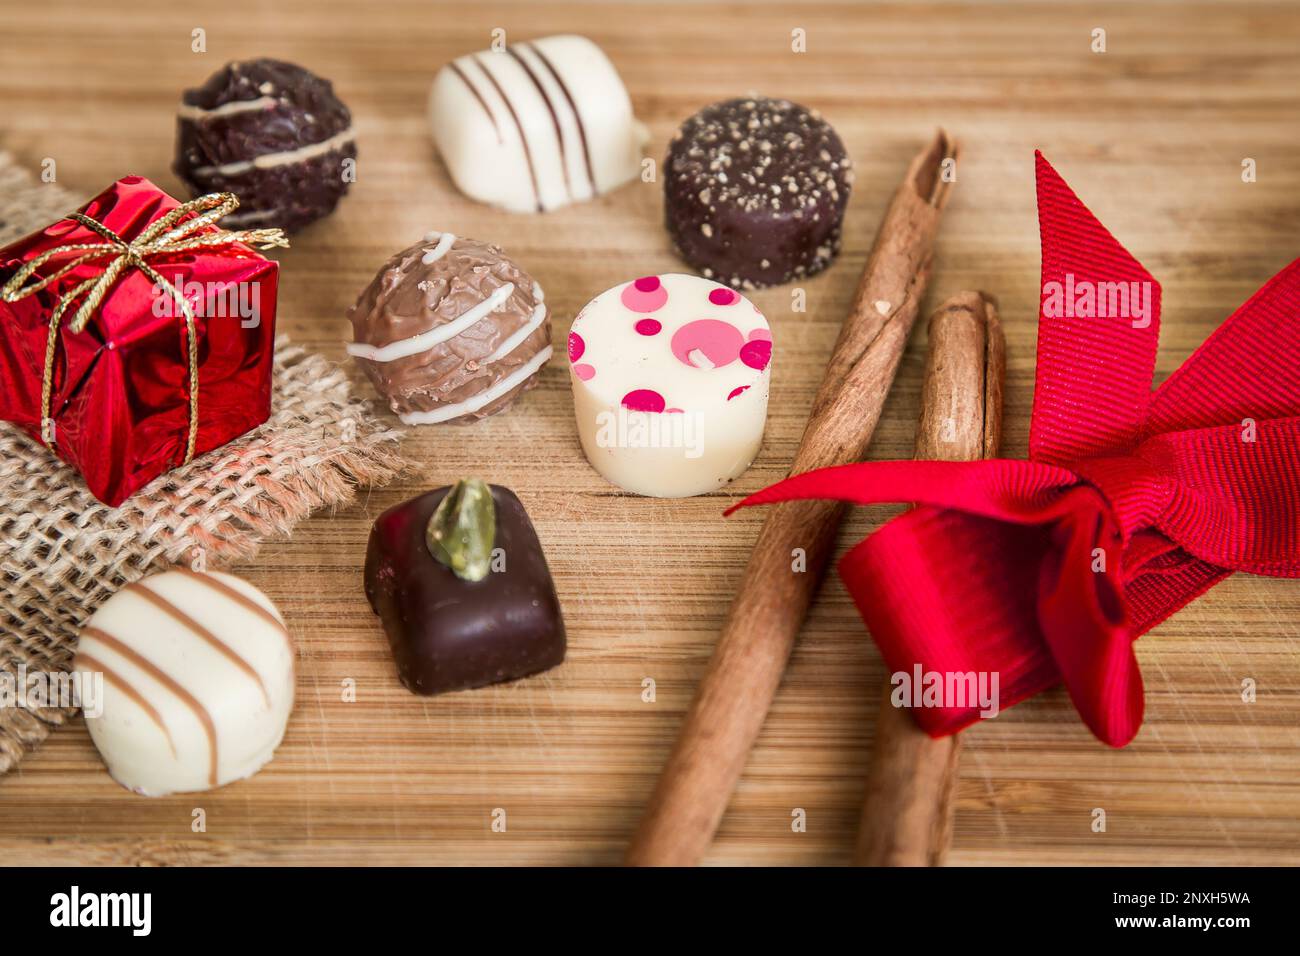 Chocolate pralines sweet Christmas candy. Small Packages with holiday decoration, red ribbon on wood. Stock Photo